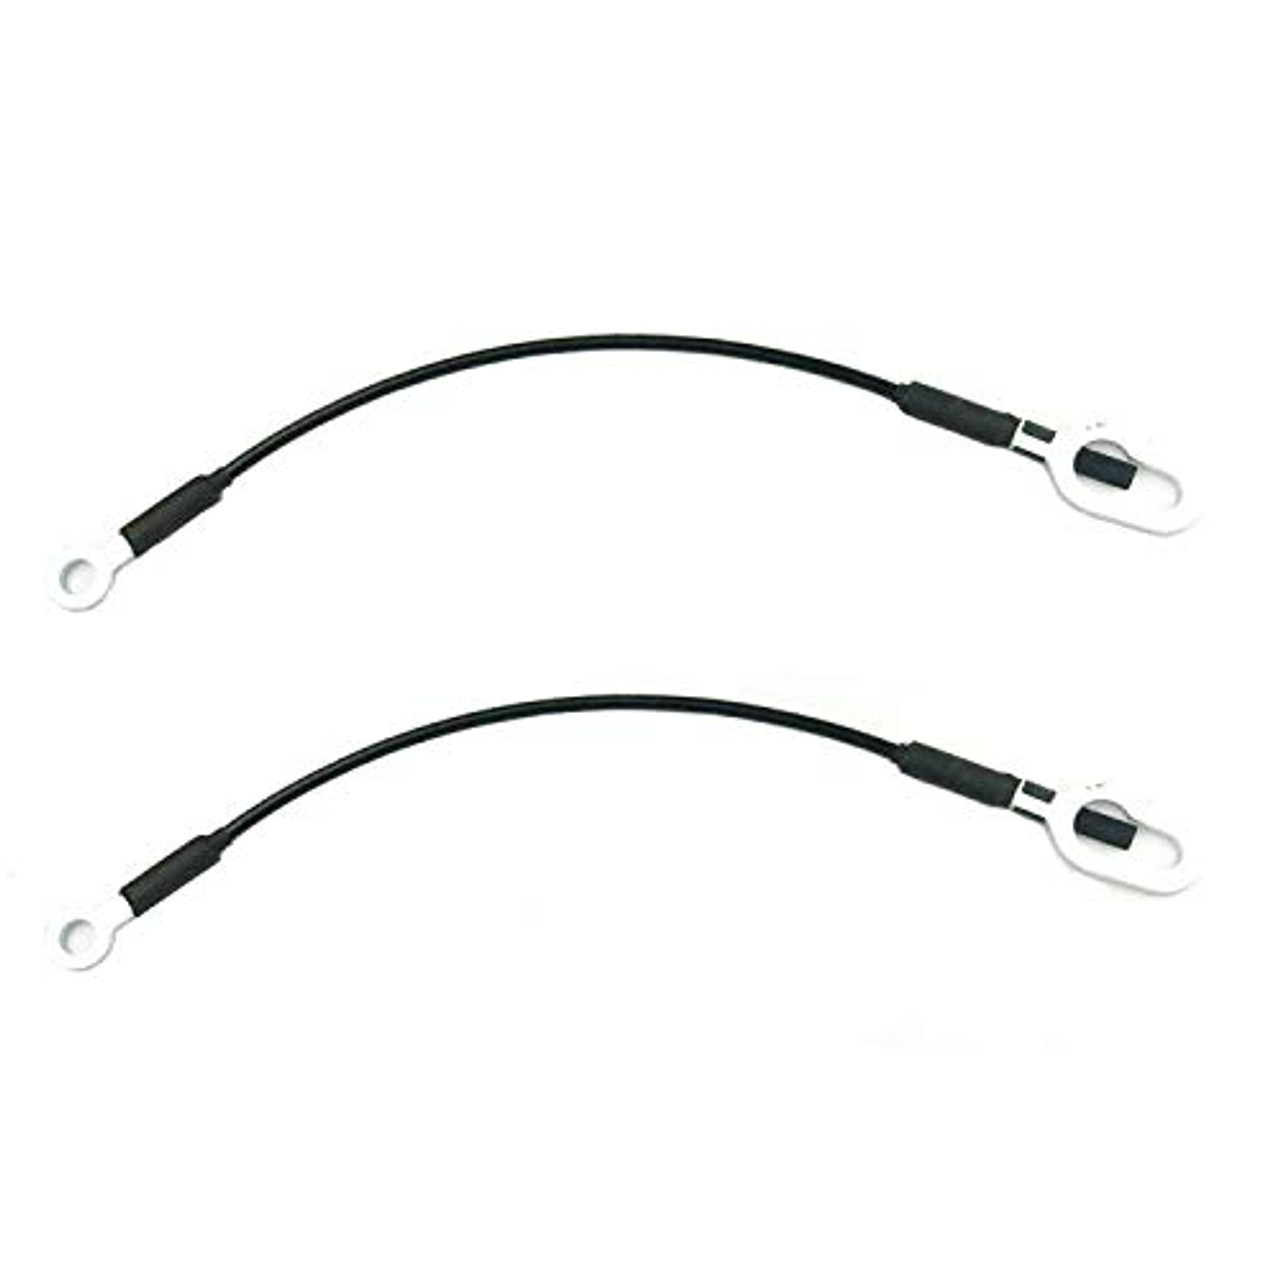 JSD Pair New Driver and Passenger Side Rear Tailgate Cable Left or Right For 1994-2002 Dodge Ram Pickup Truck 55345124AB 2 pcs 